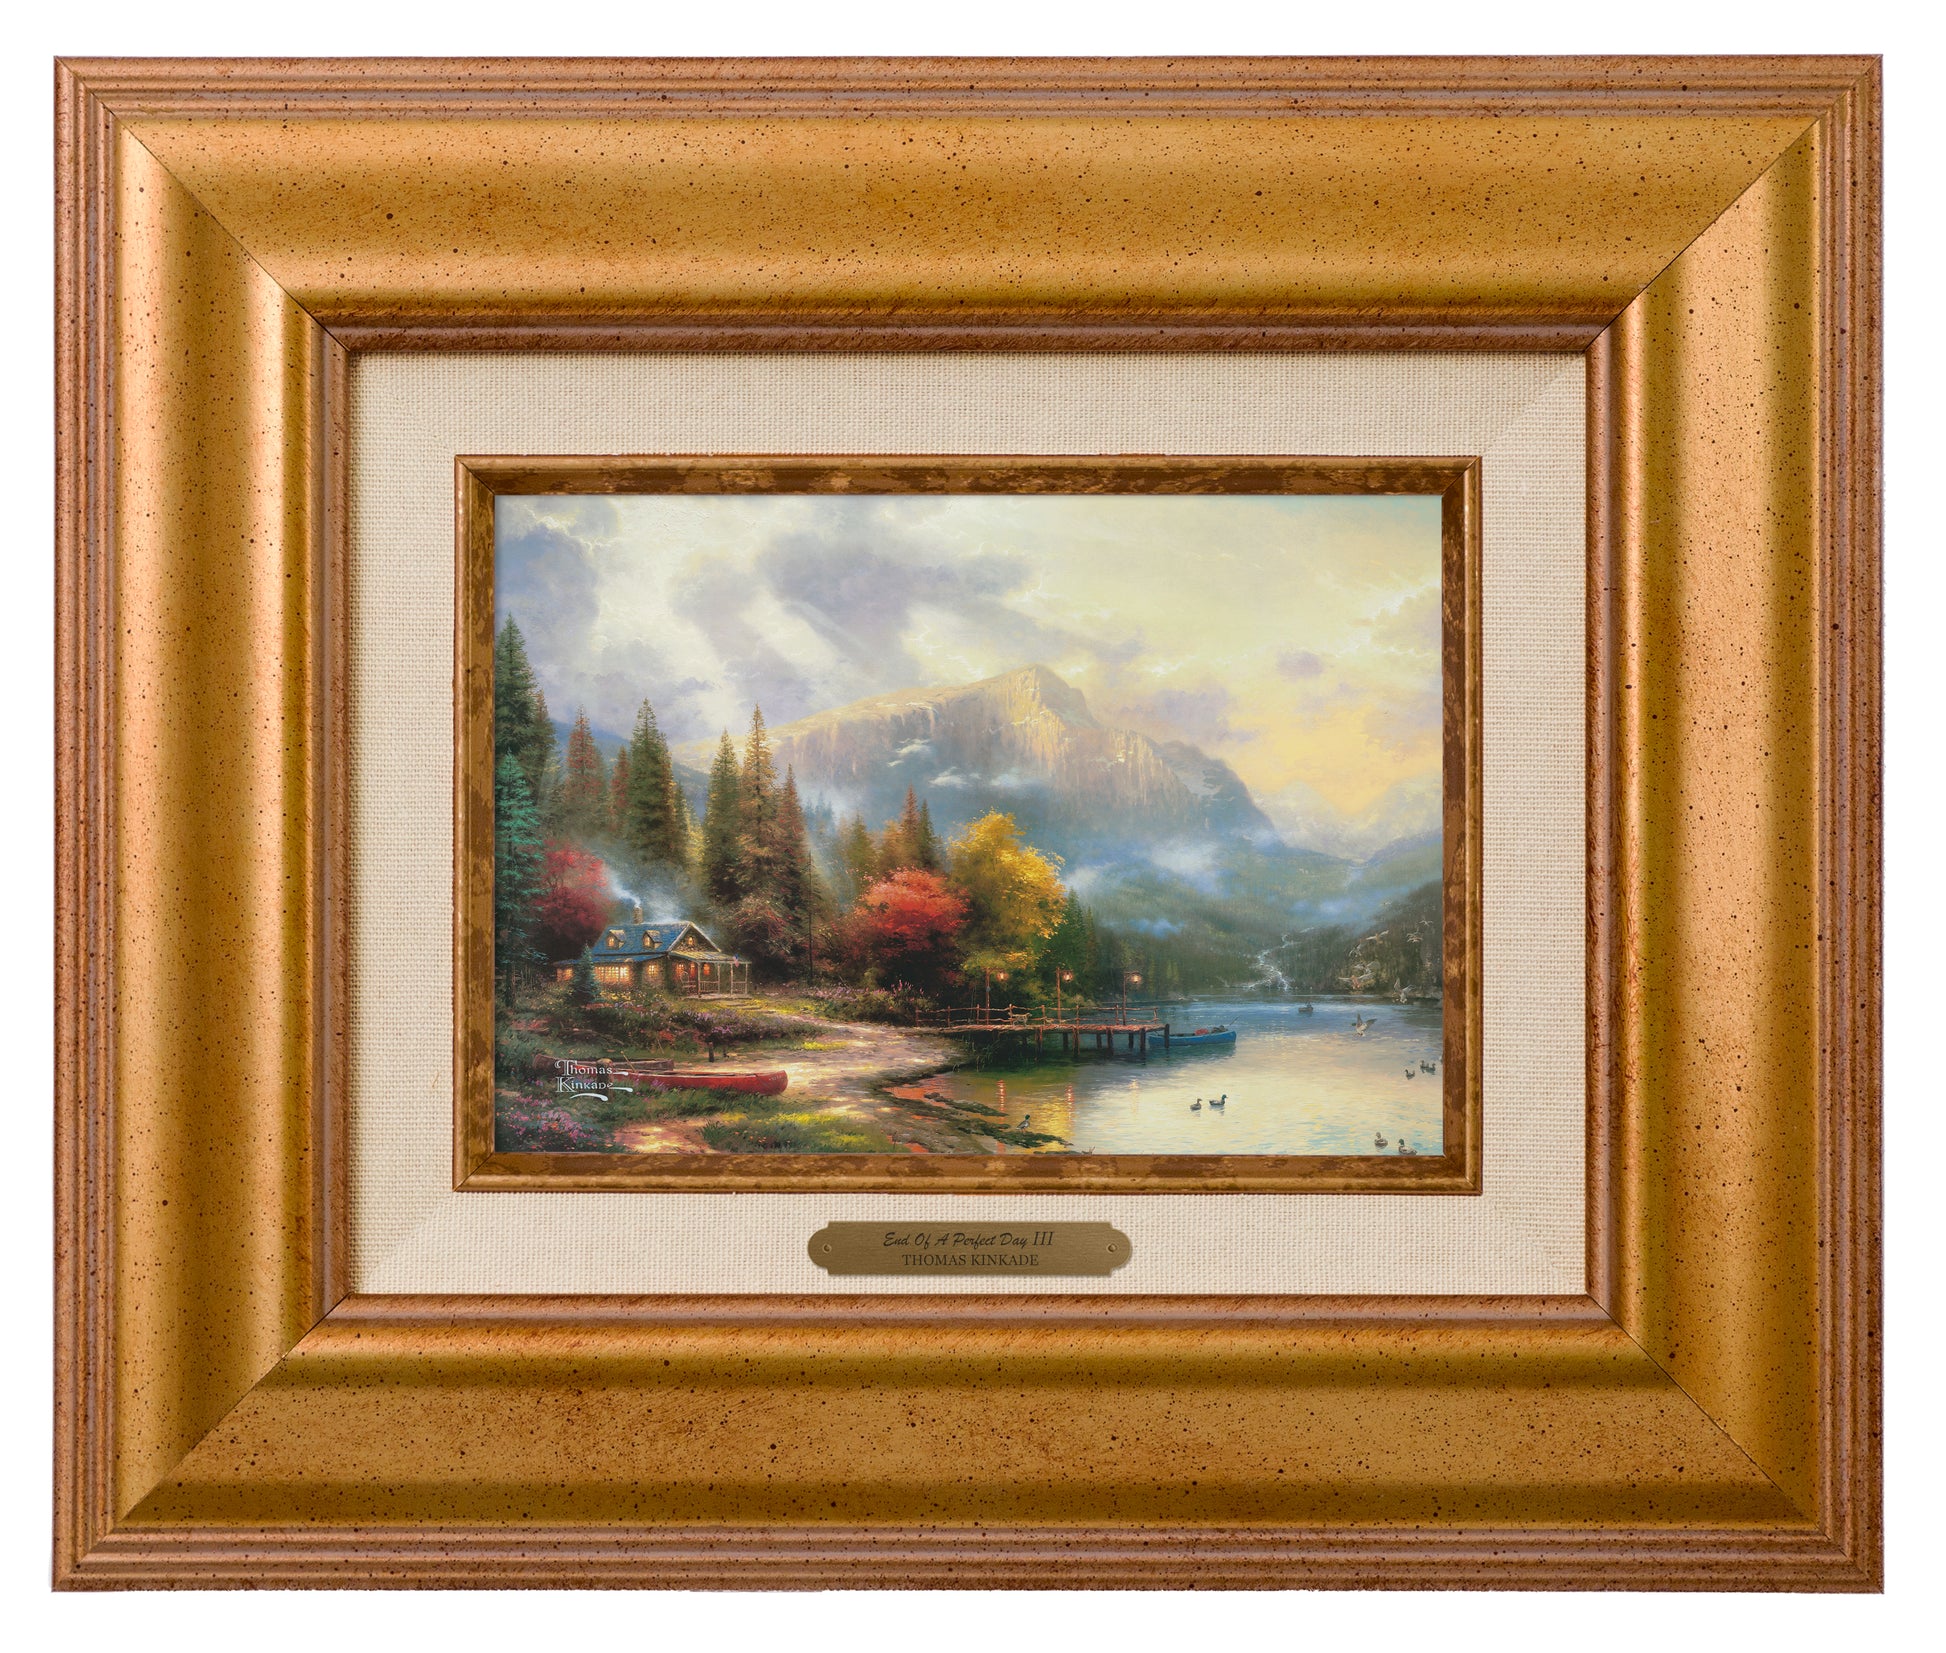 161948_BRW End Of A Perfect Day III 5X7 - Golden Sunset Frame.jpg